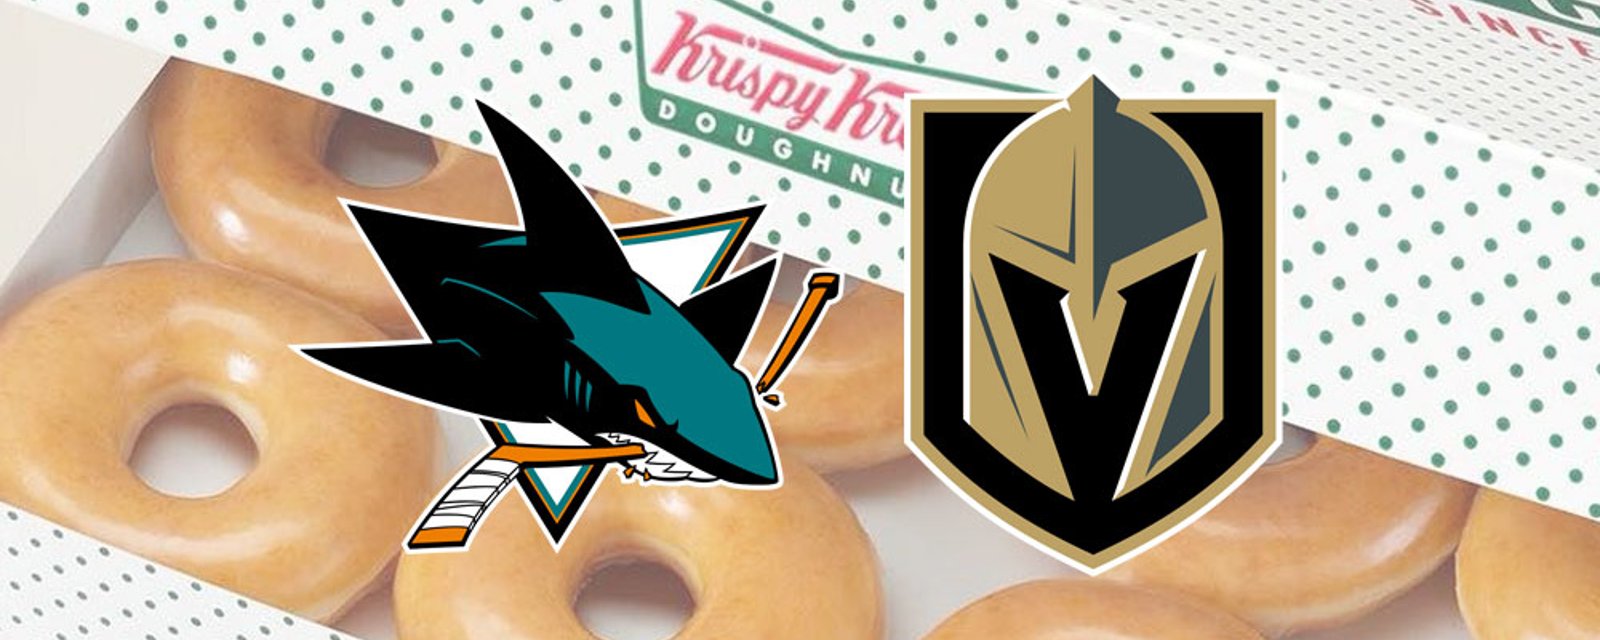 Krispy Kreme offers free donuts and claims their allegiance in the Sharks and Golden Knights rivalry